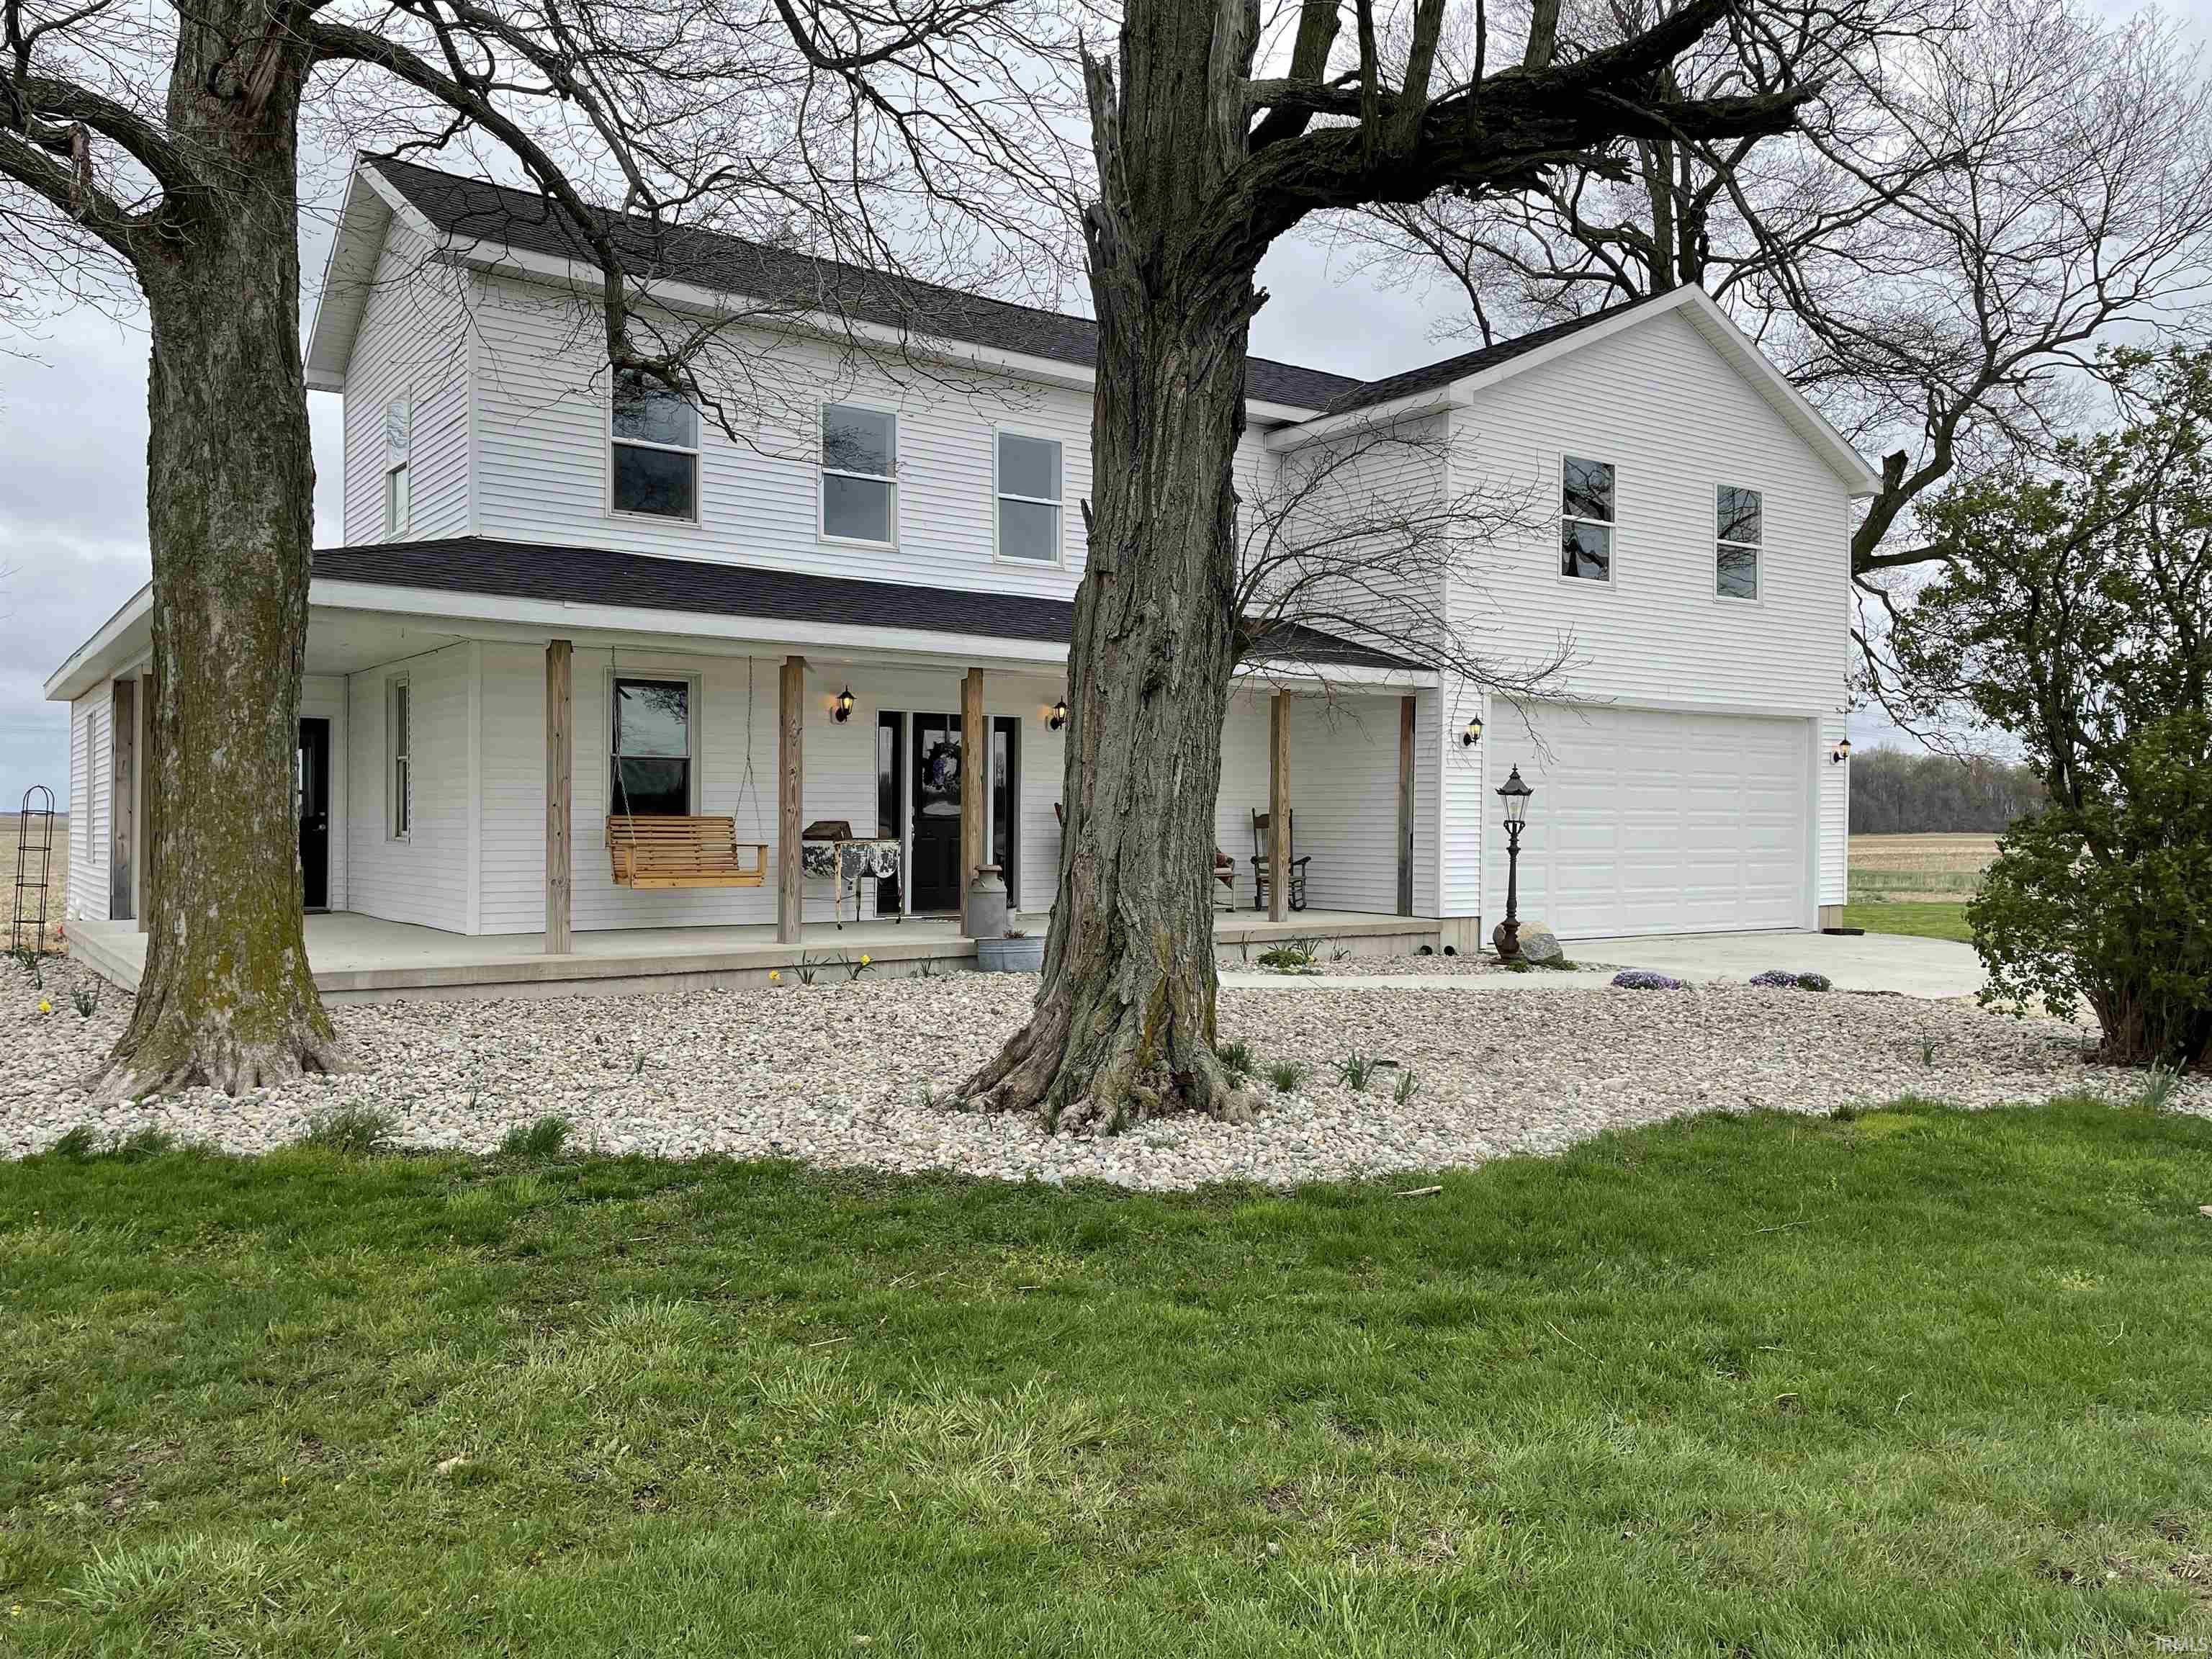 7075 100 W, Huntington, Indiana 46750, 3 Bedrooms Bedrooms, 7 Rooms Rooms,1 BathroomBathrooms,Residential,For Sale,100 W,202214895